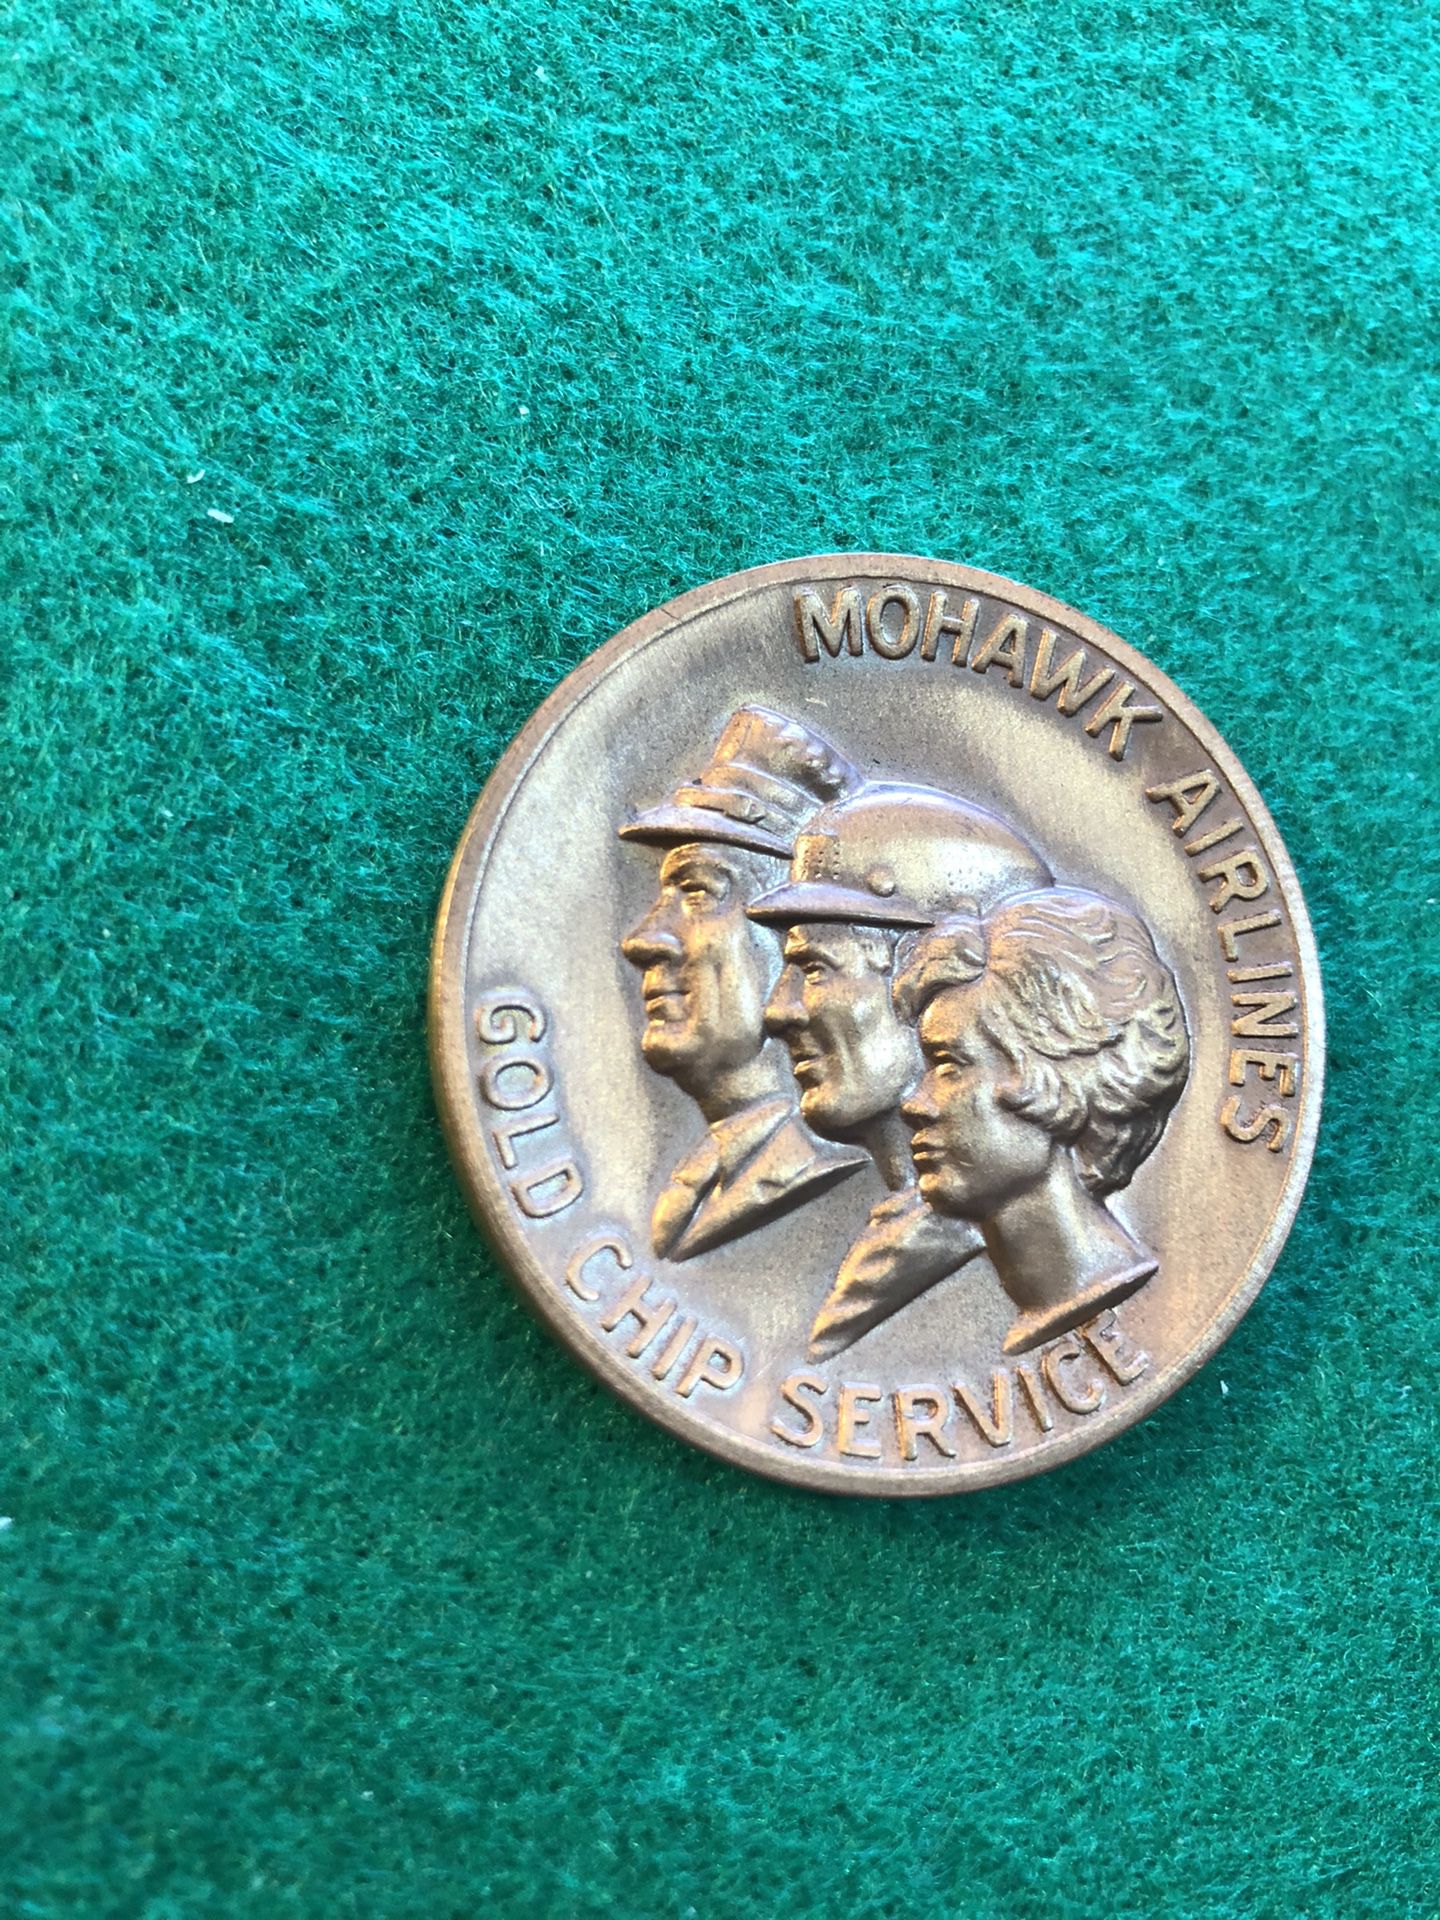 1960 MOHAWK AIRLINES GOLD CHIP SERVICE TOKEN MINT CONDITION 